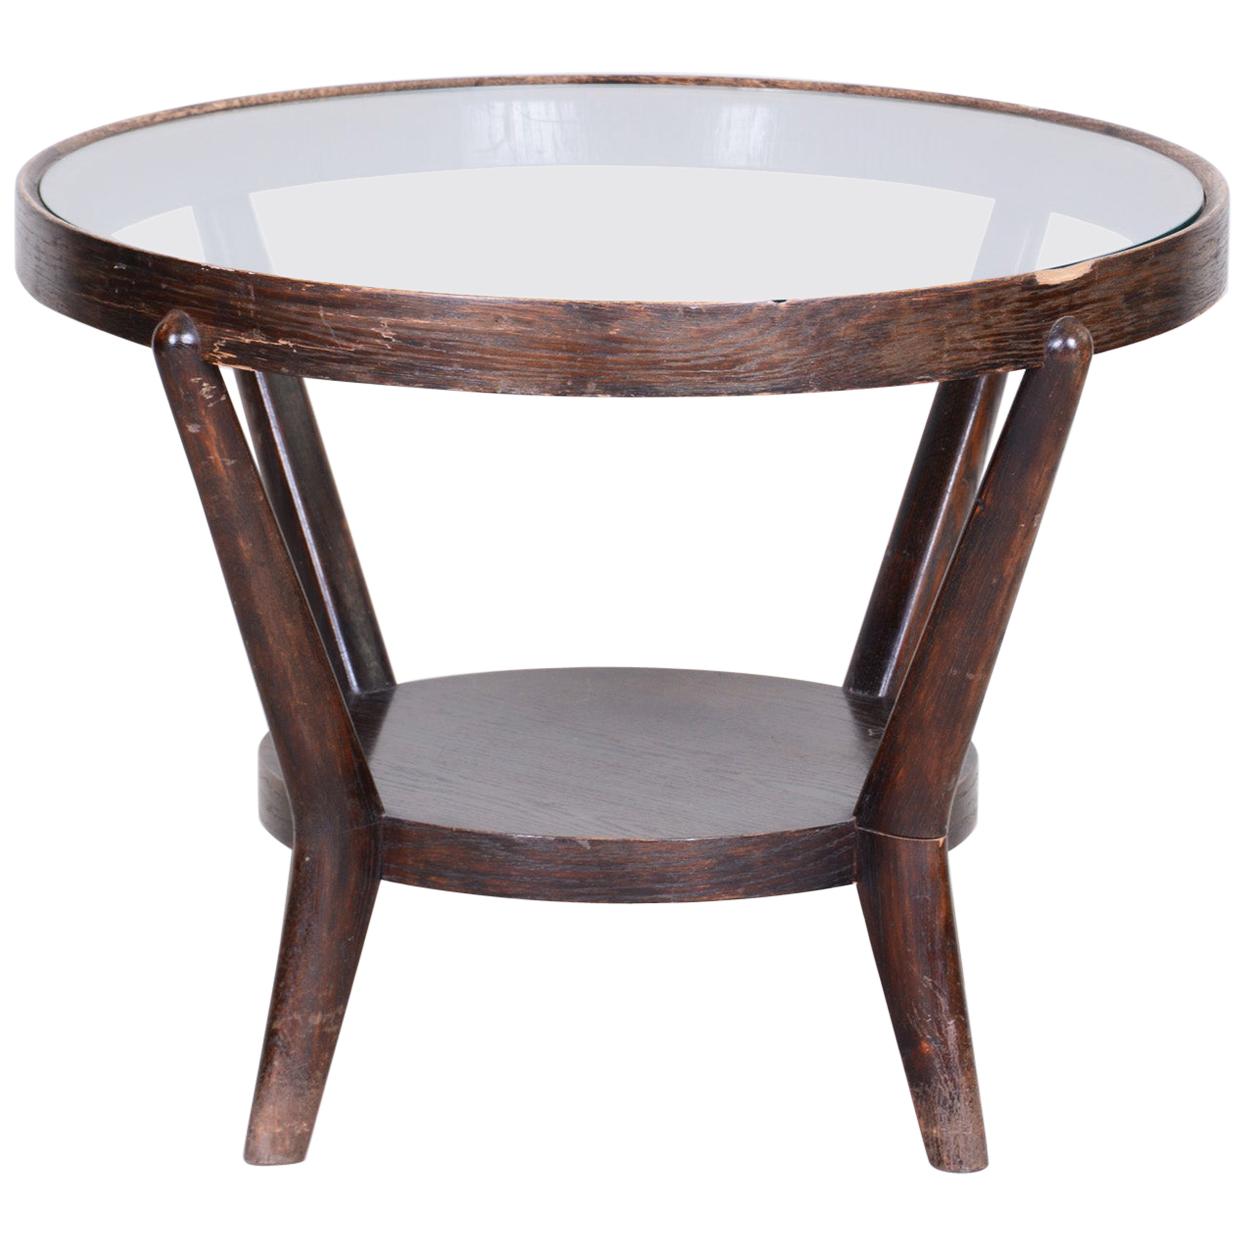 Small Brown Round Table, Czech Functionalism, Material Oak, Glass, 1940s For Sale